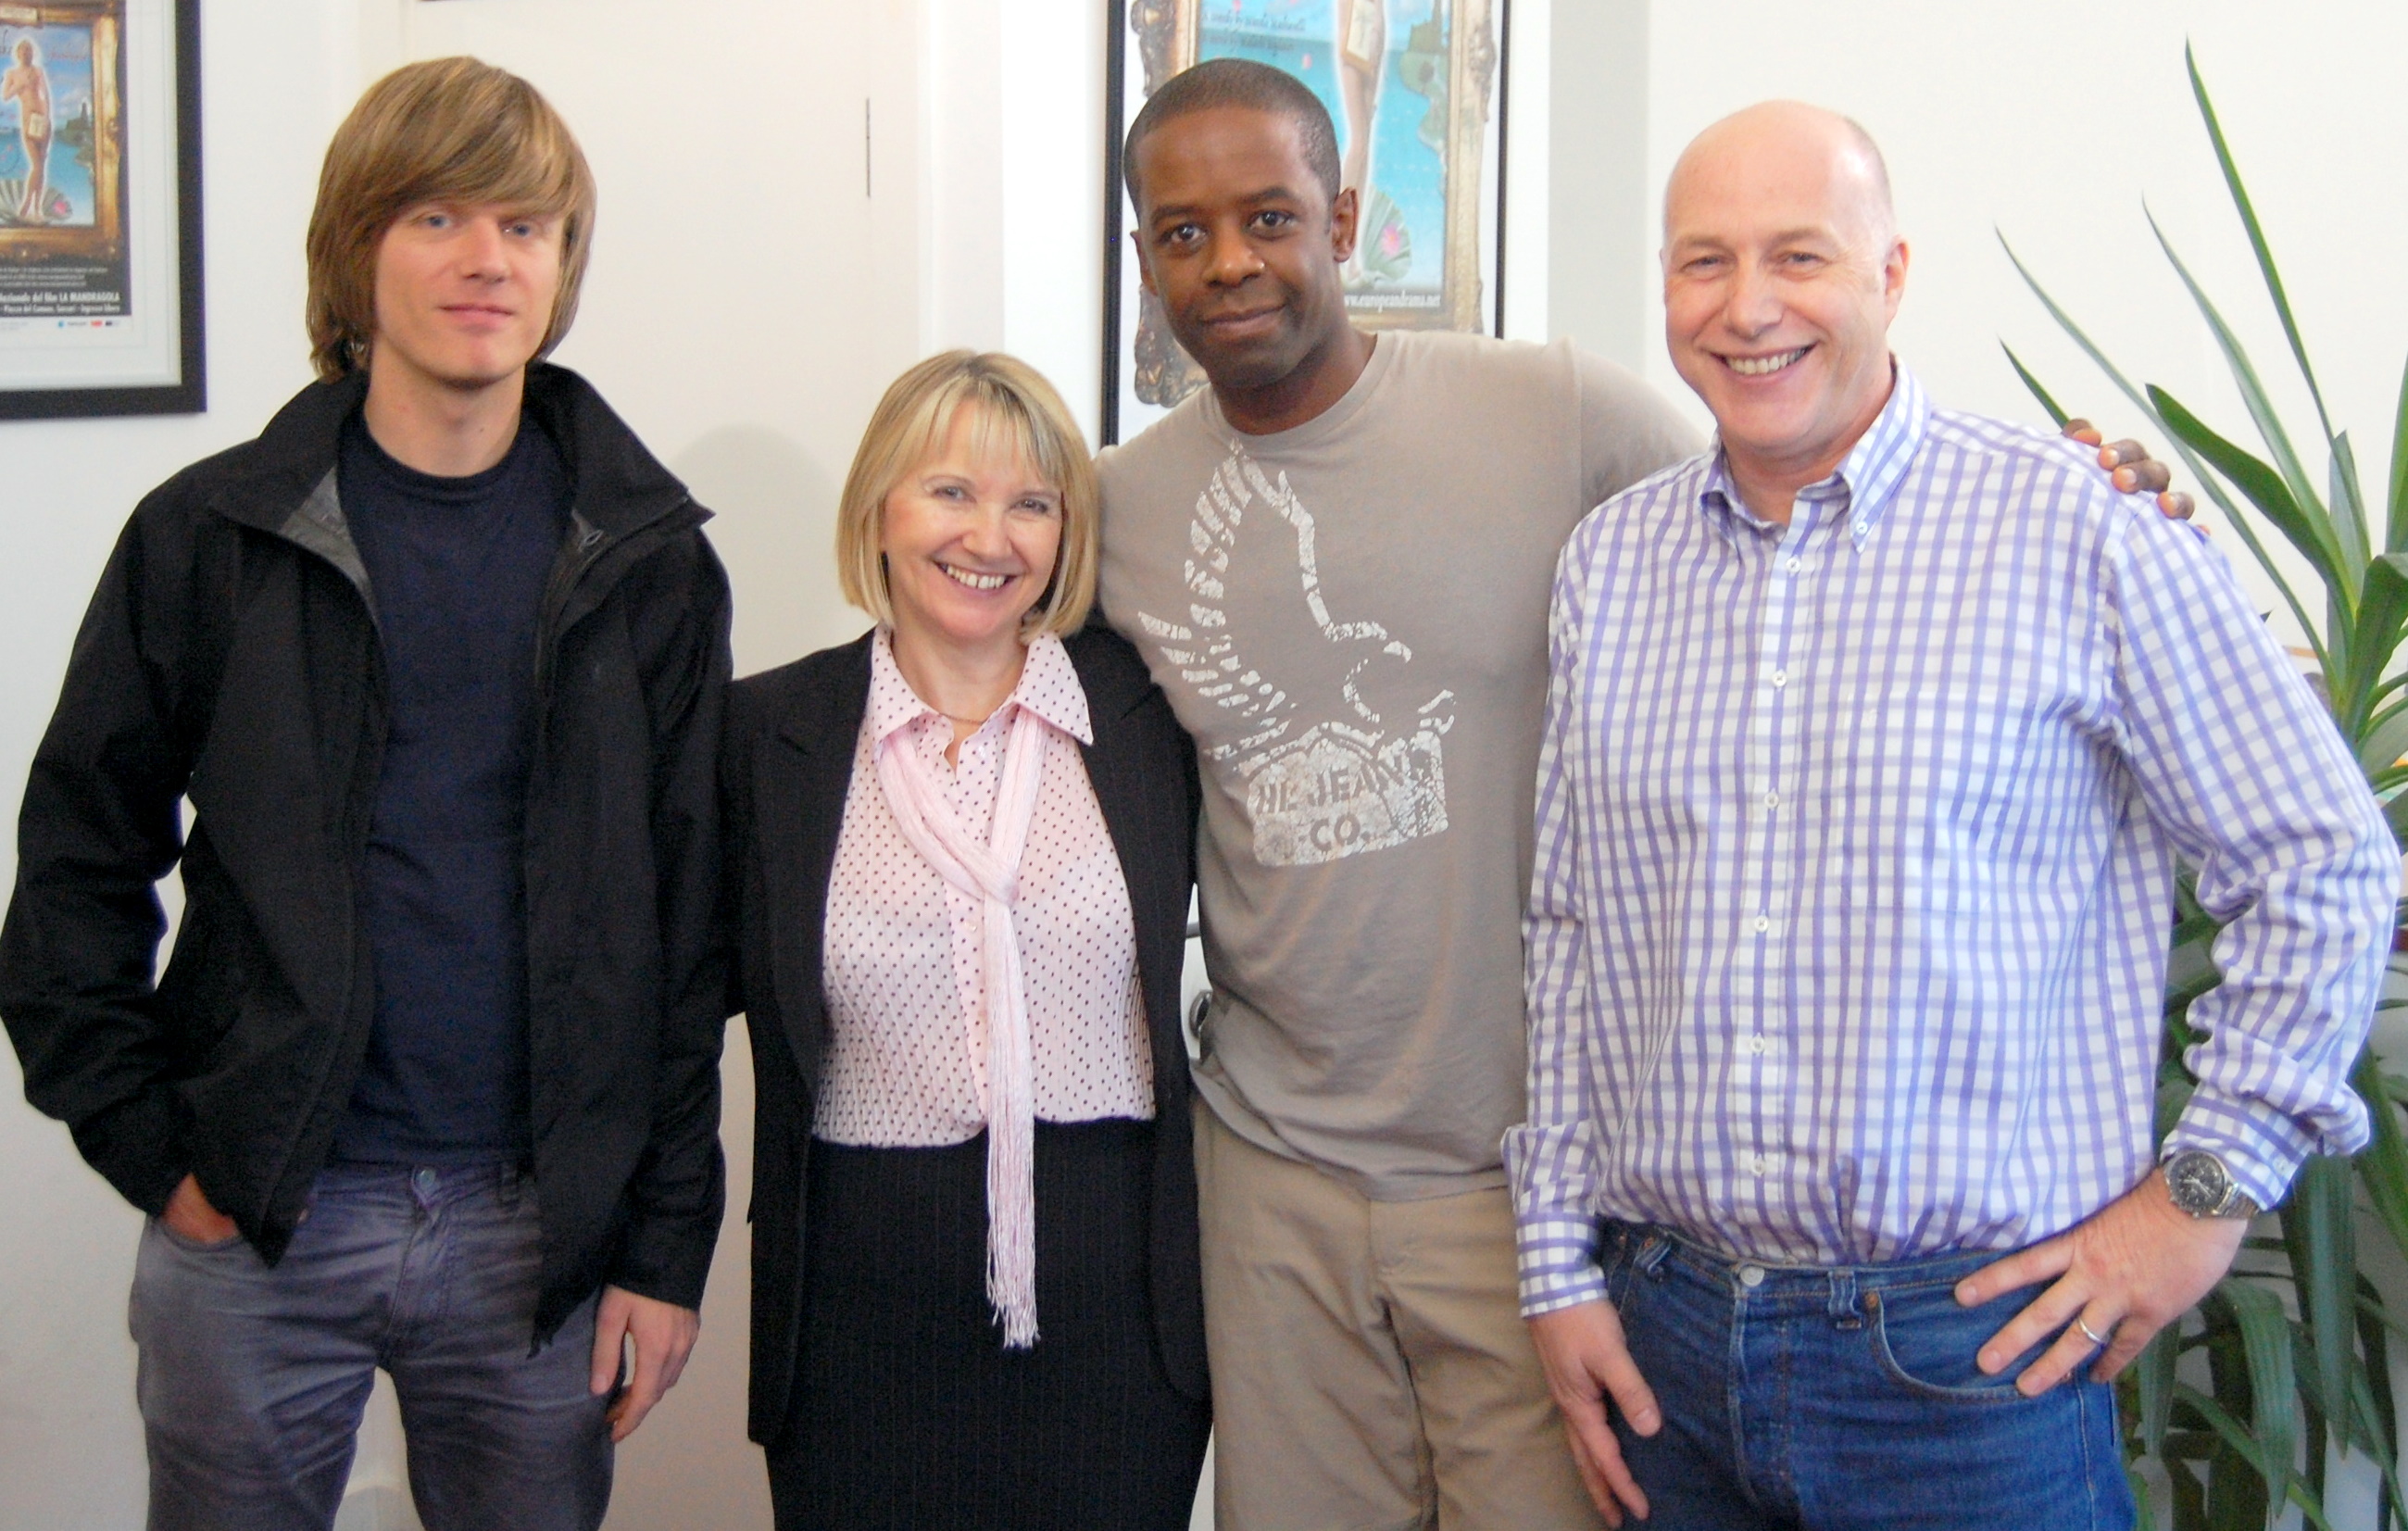 Adrian Lester at The Audio Suite for his Hustle ADR session for Series 8, Episodes 1 and 2. Dialogue Editor Alex Sawyer (left), Facility Manager Heather Reinman, Adrian Lester and ADR Mixer Neil Hillman (right).